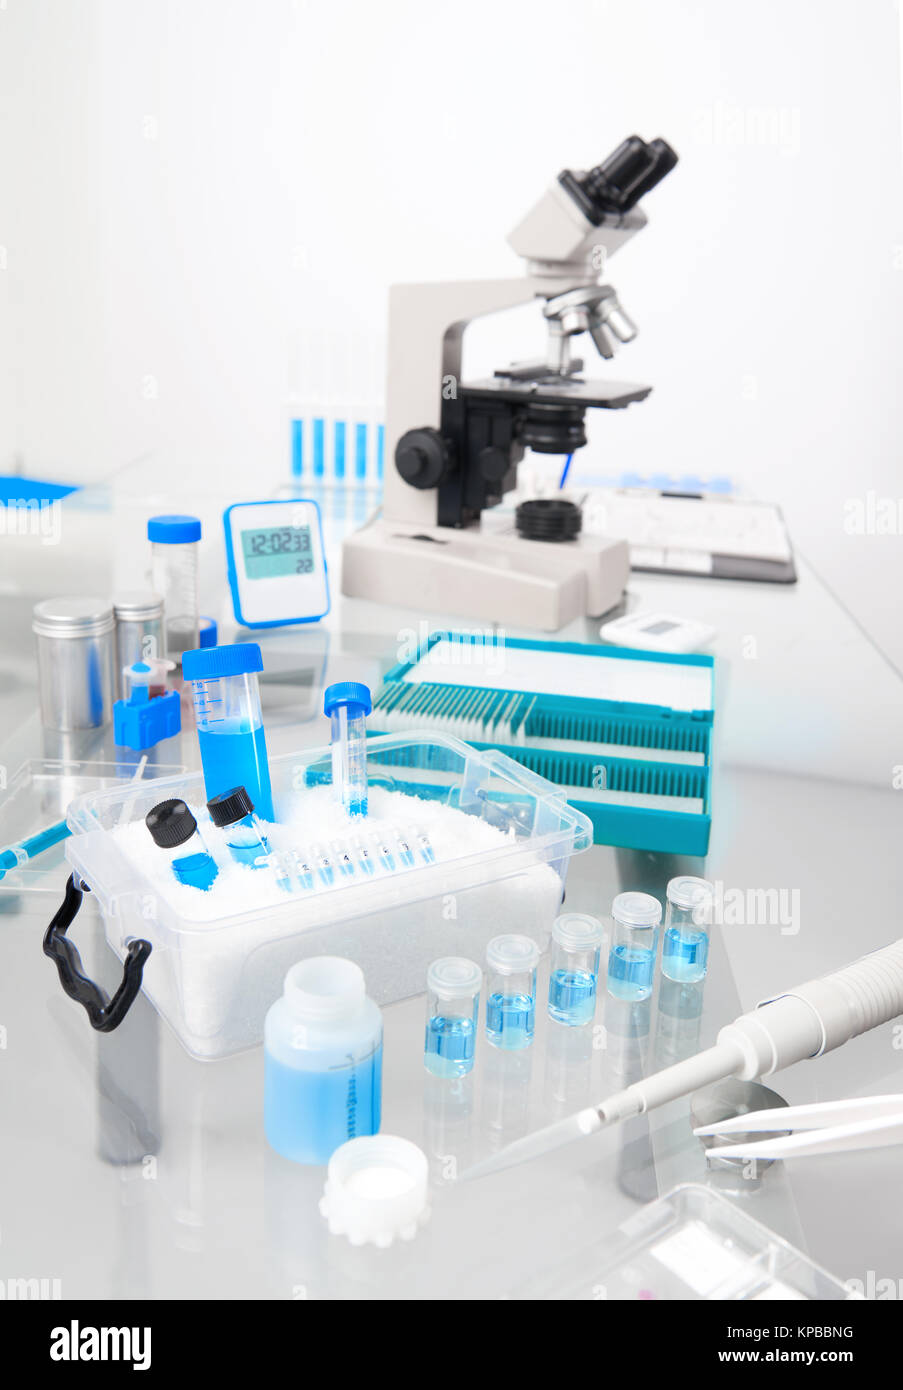 Science background with microscopic work station. Microscope and tools for histological staining for cancer diagnostics Stock Photo